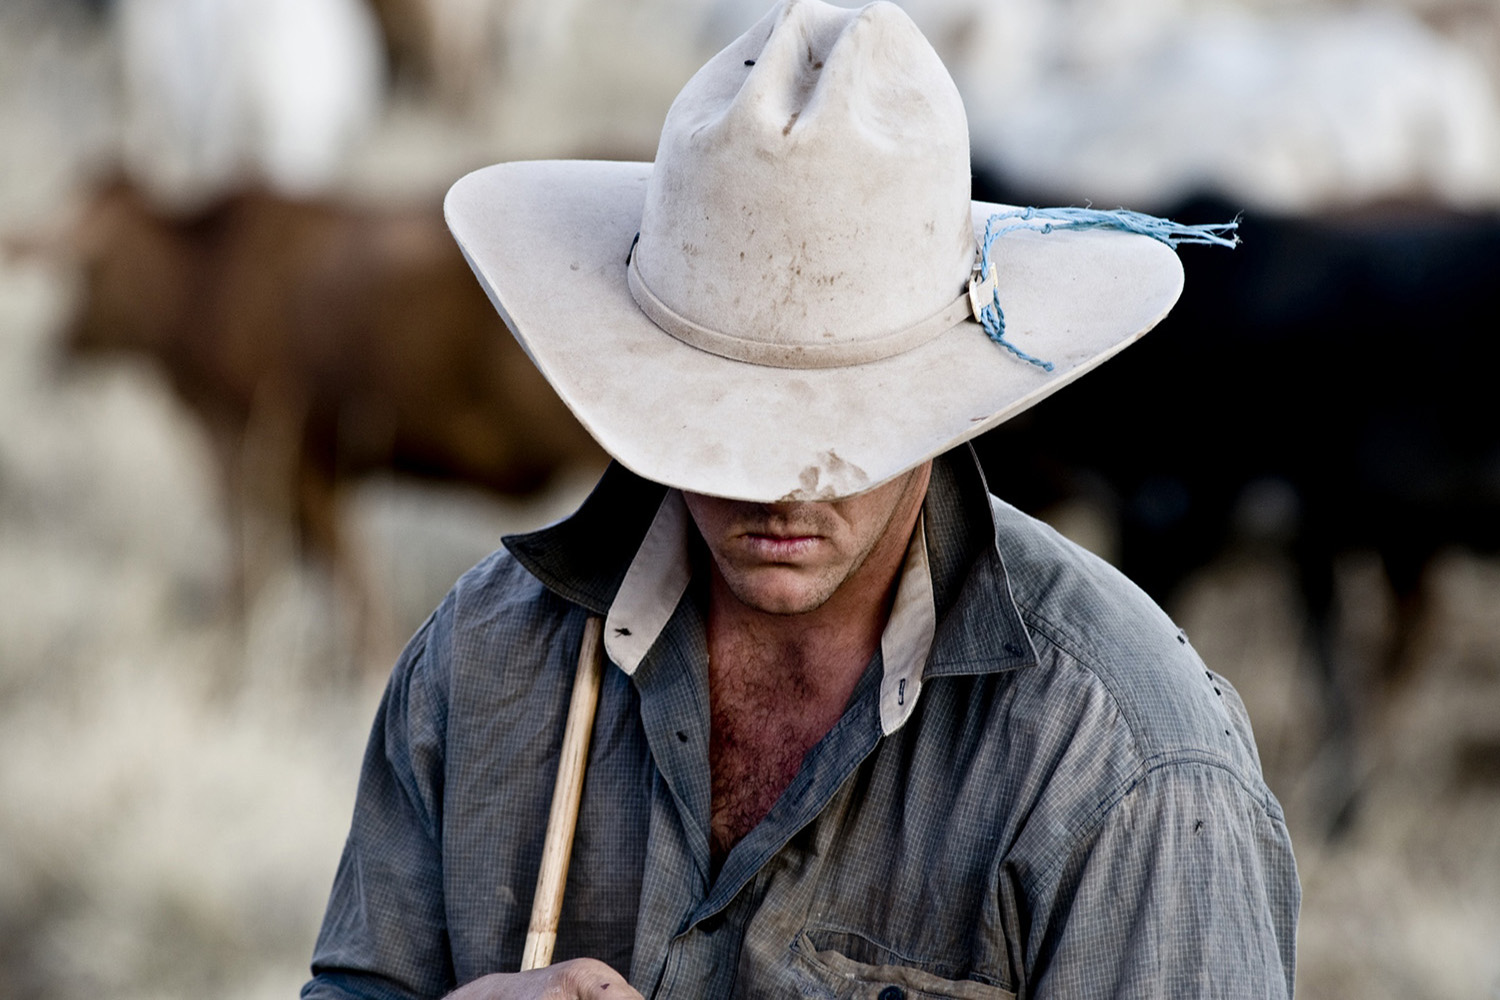 image of AARONTAIT COPYRIGHTED 2014 363 RURAL PHOTOGRAPHER FARM LIFE AGRICULTURE WOOL BEEF STOCKMAN MUSTER CATTLE FARM AUSTRALIAN STOCKMAN HAT COWBOY JACKAROO